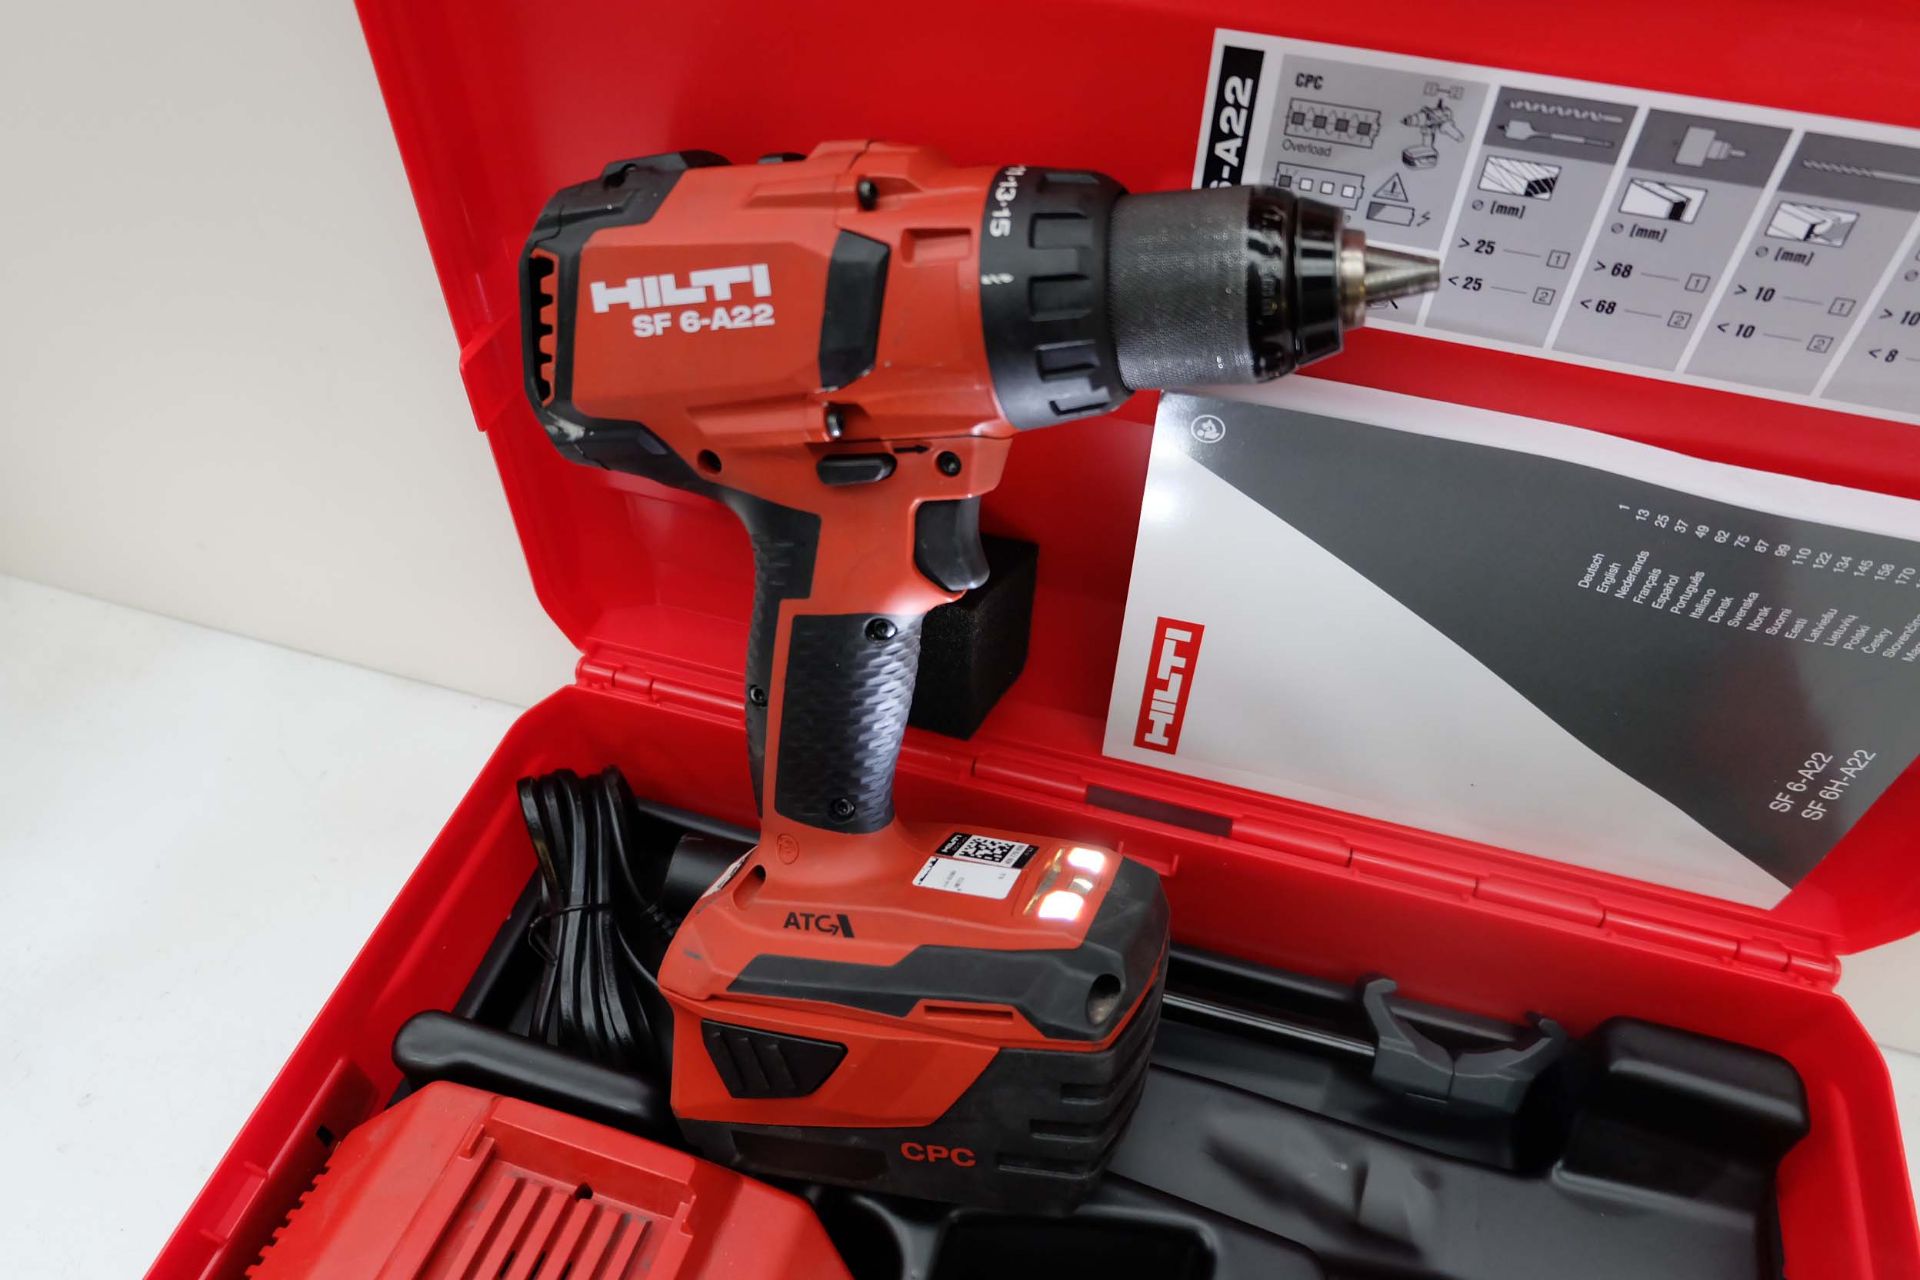 Hilti Model SF 6-A22 Cordless Power Drill. 2 x 22V 5.2Ah Batteries. 240V Charger. - Image 4 of 8